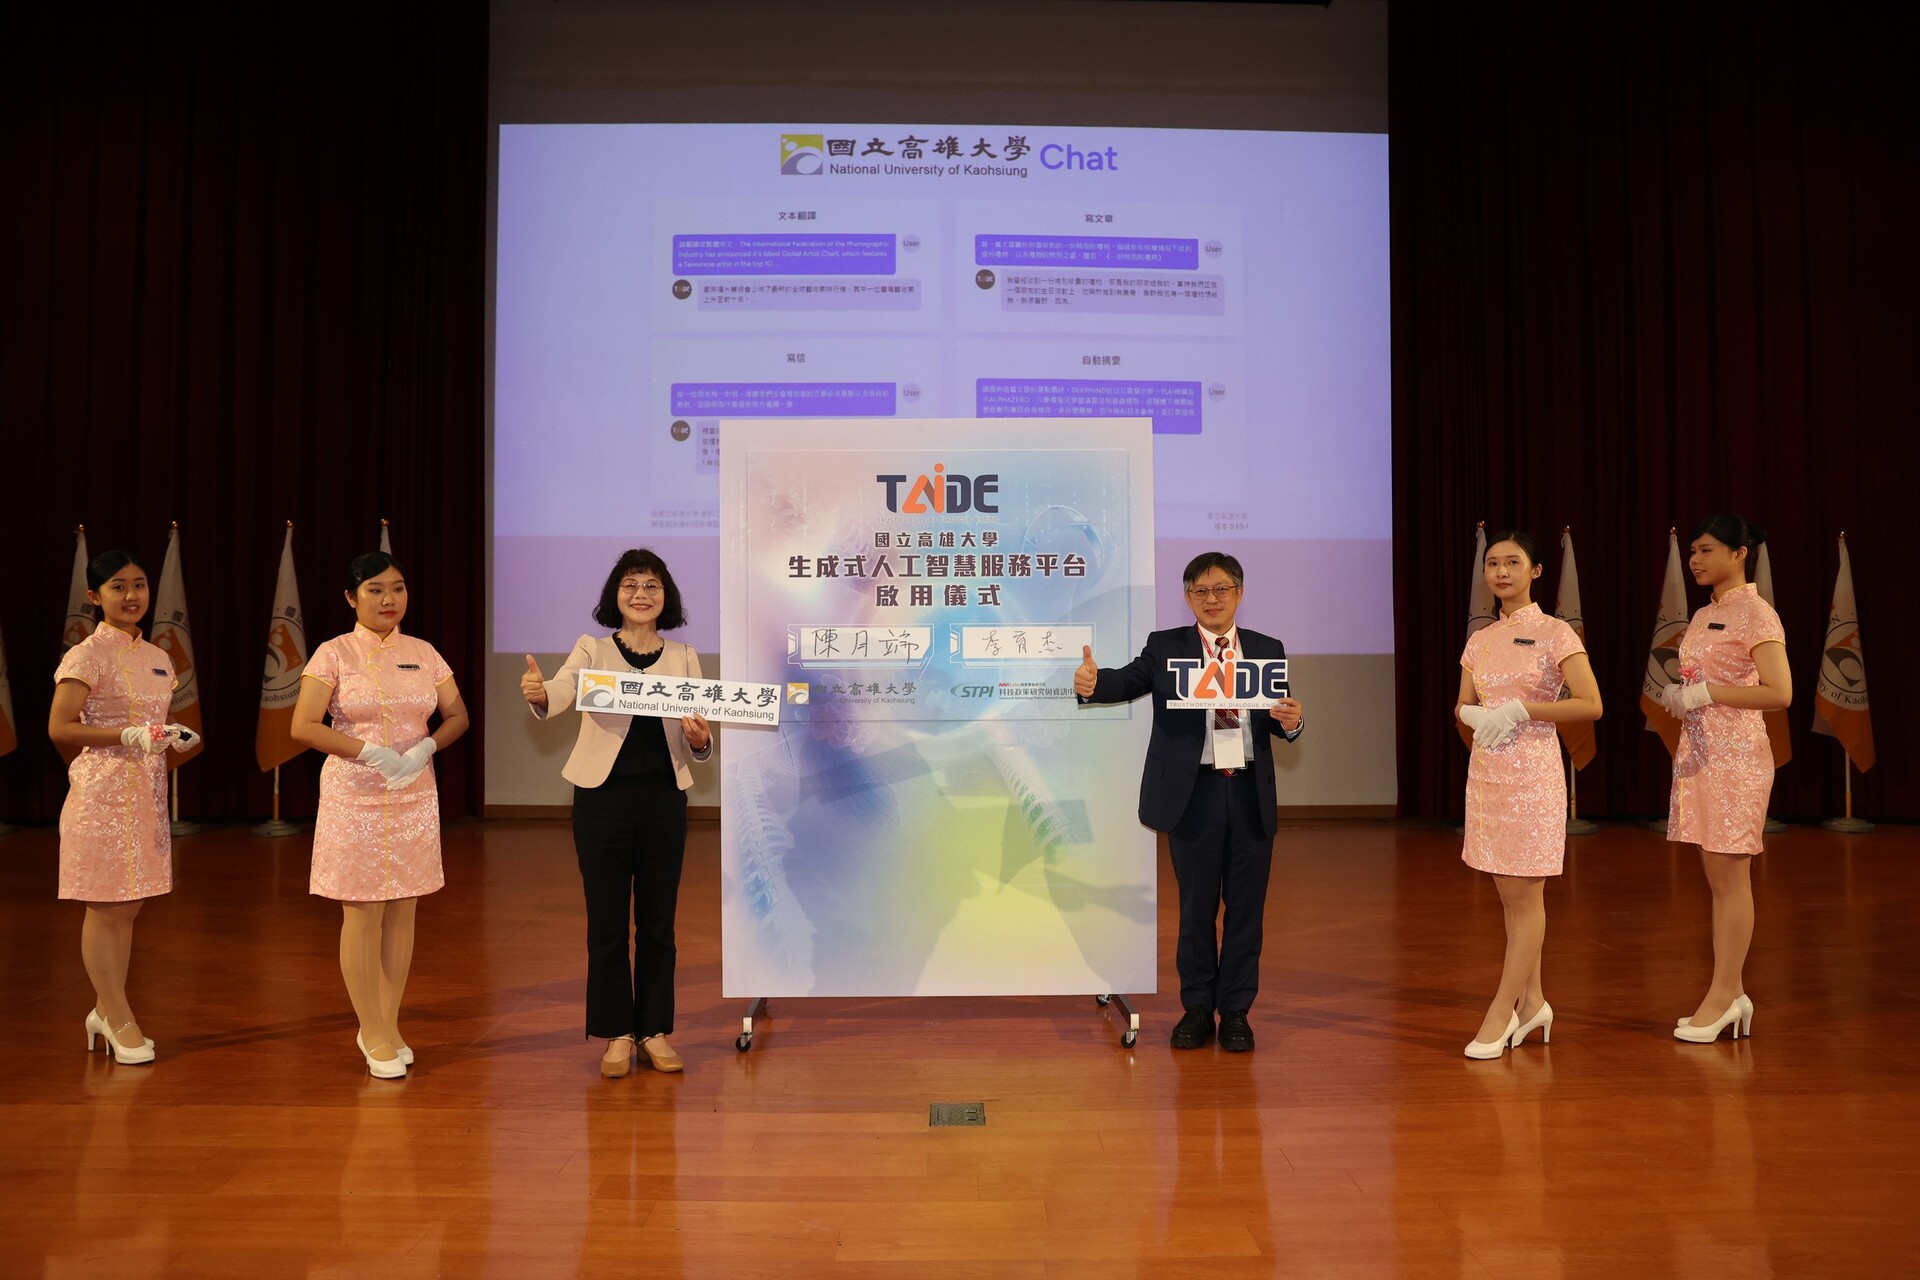 President Chen Yueh-Tuan of NUK and Lee Yuh-Jye, the principal investigator of the TAIDE project signed an MOU on behalf of both parties. 02